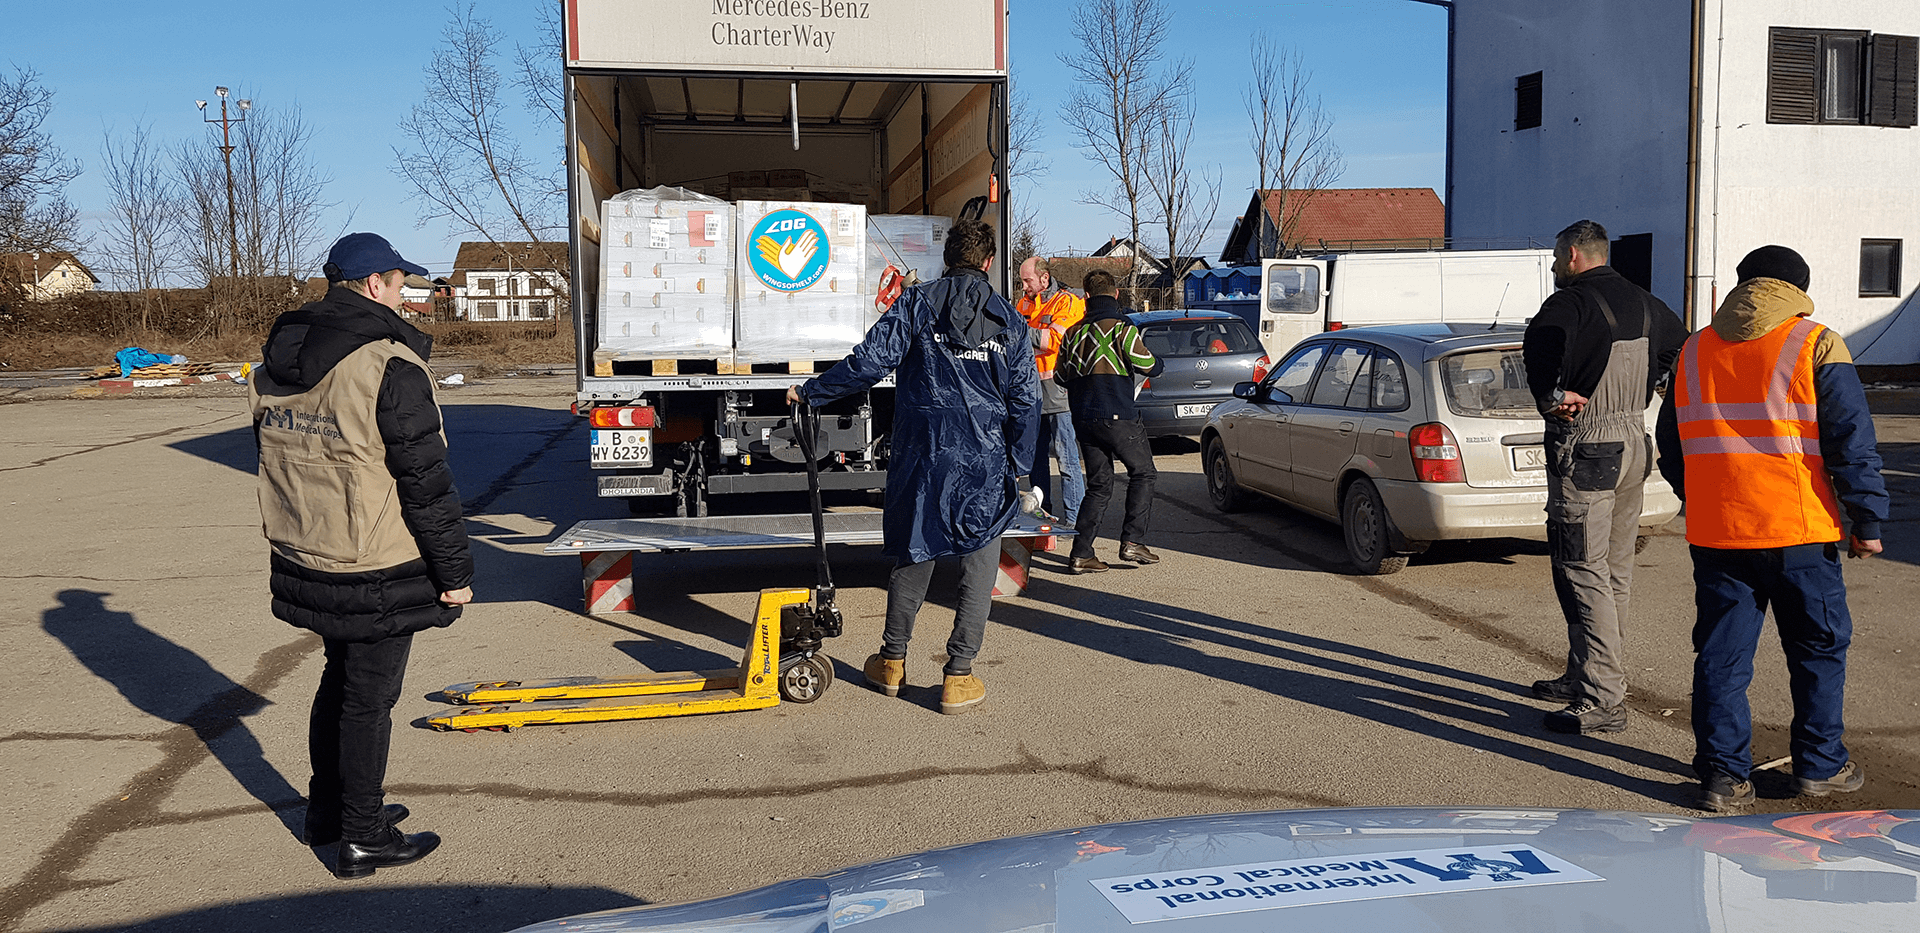 Within hours of the earthquake in central Croatia, we deployed more than $50,000 worth of PPE to support Croatian health authorities involved in relief efforts.